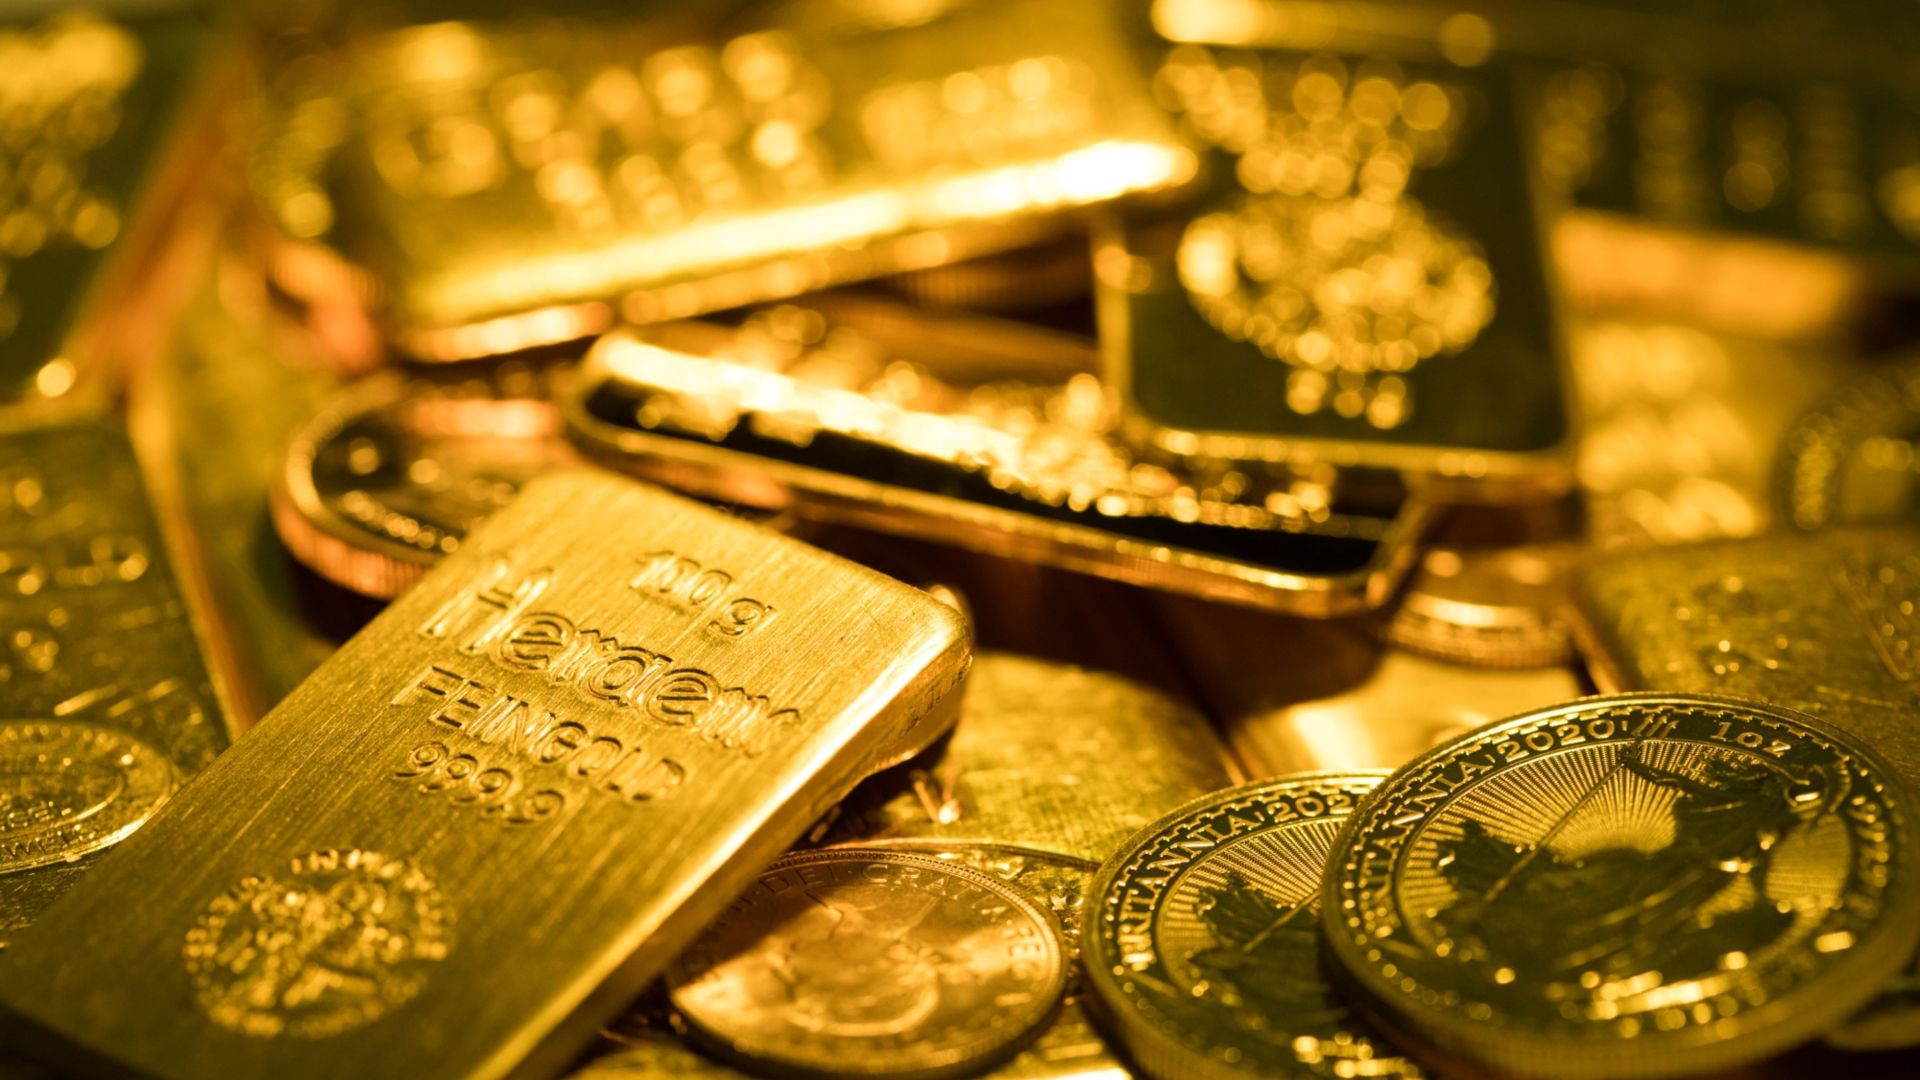 After Covid, just how high will prices go in the gold rush? | Gold | The Guardian